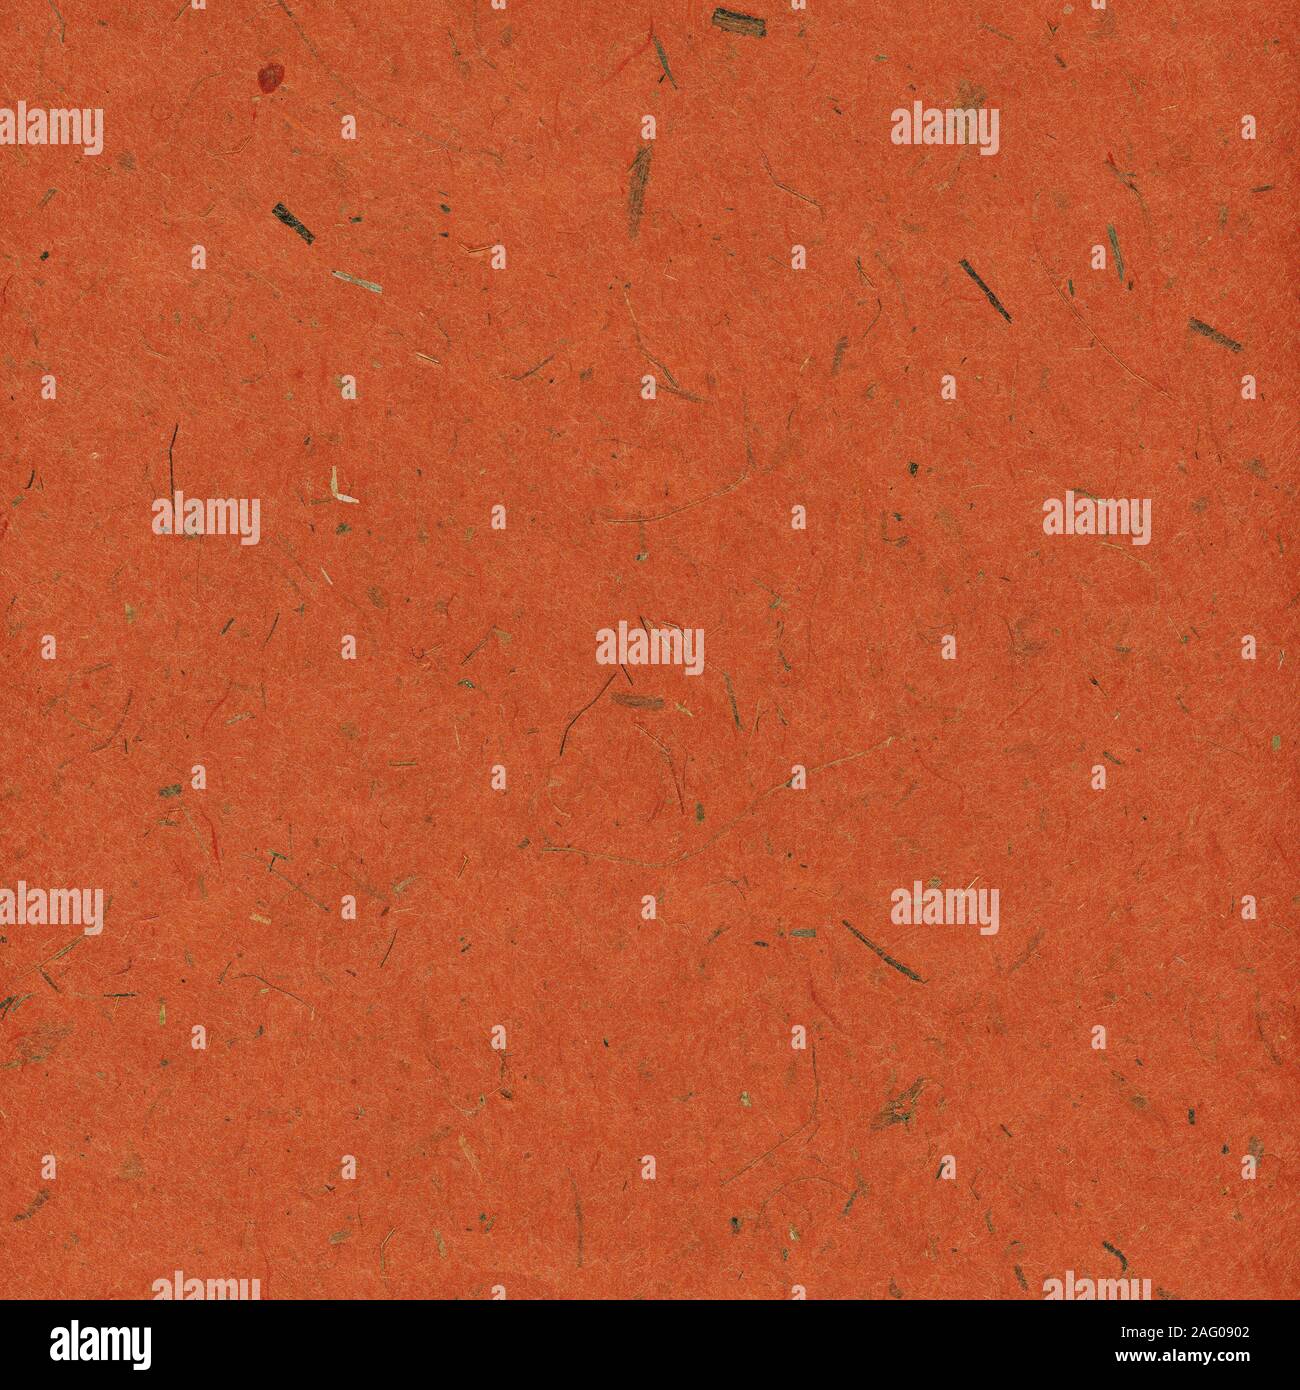 Orange paper background with pattern Stock Photo